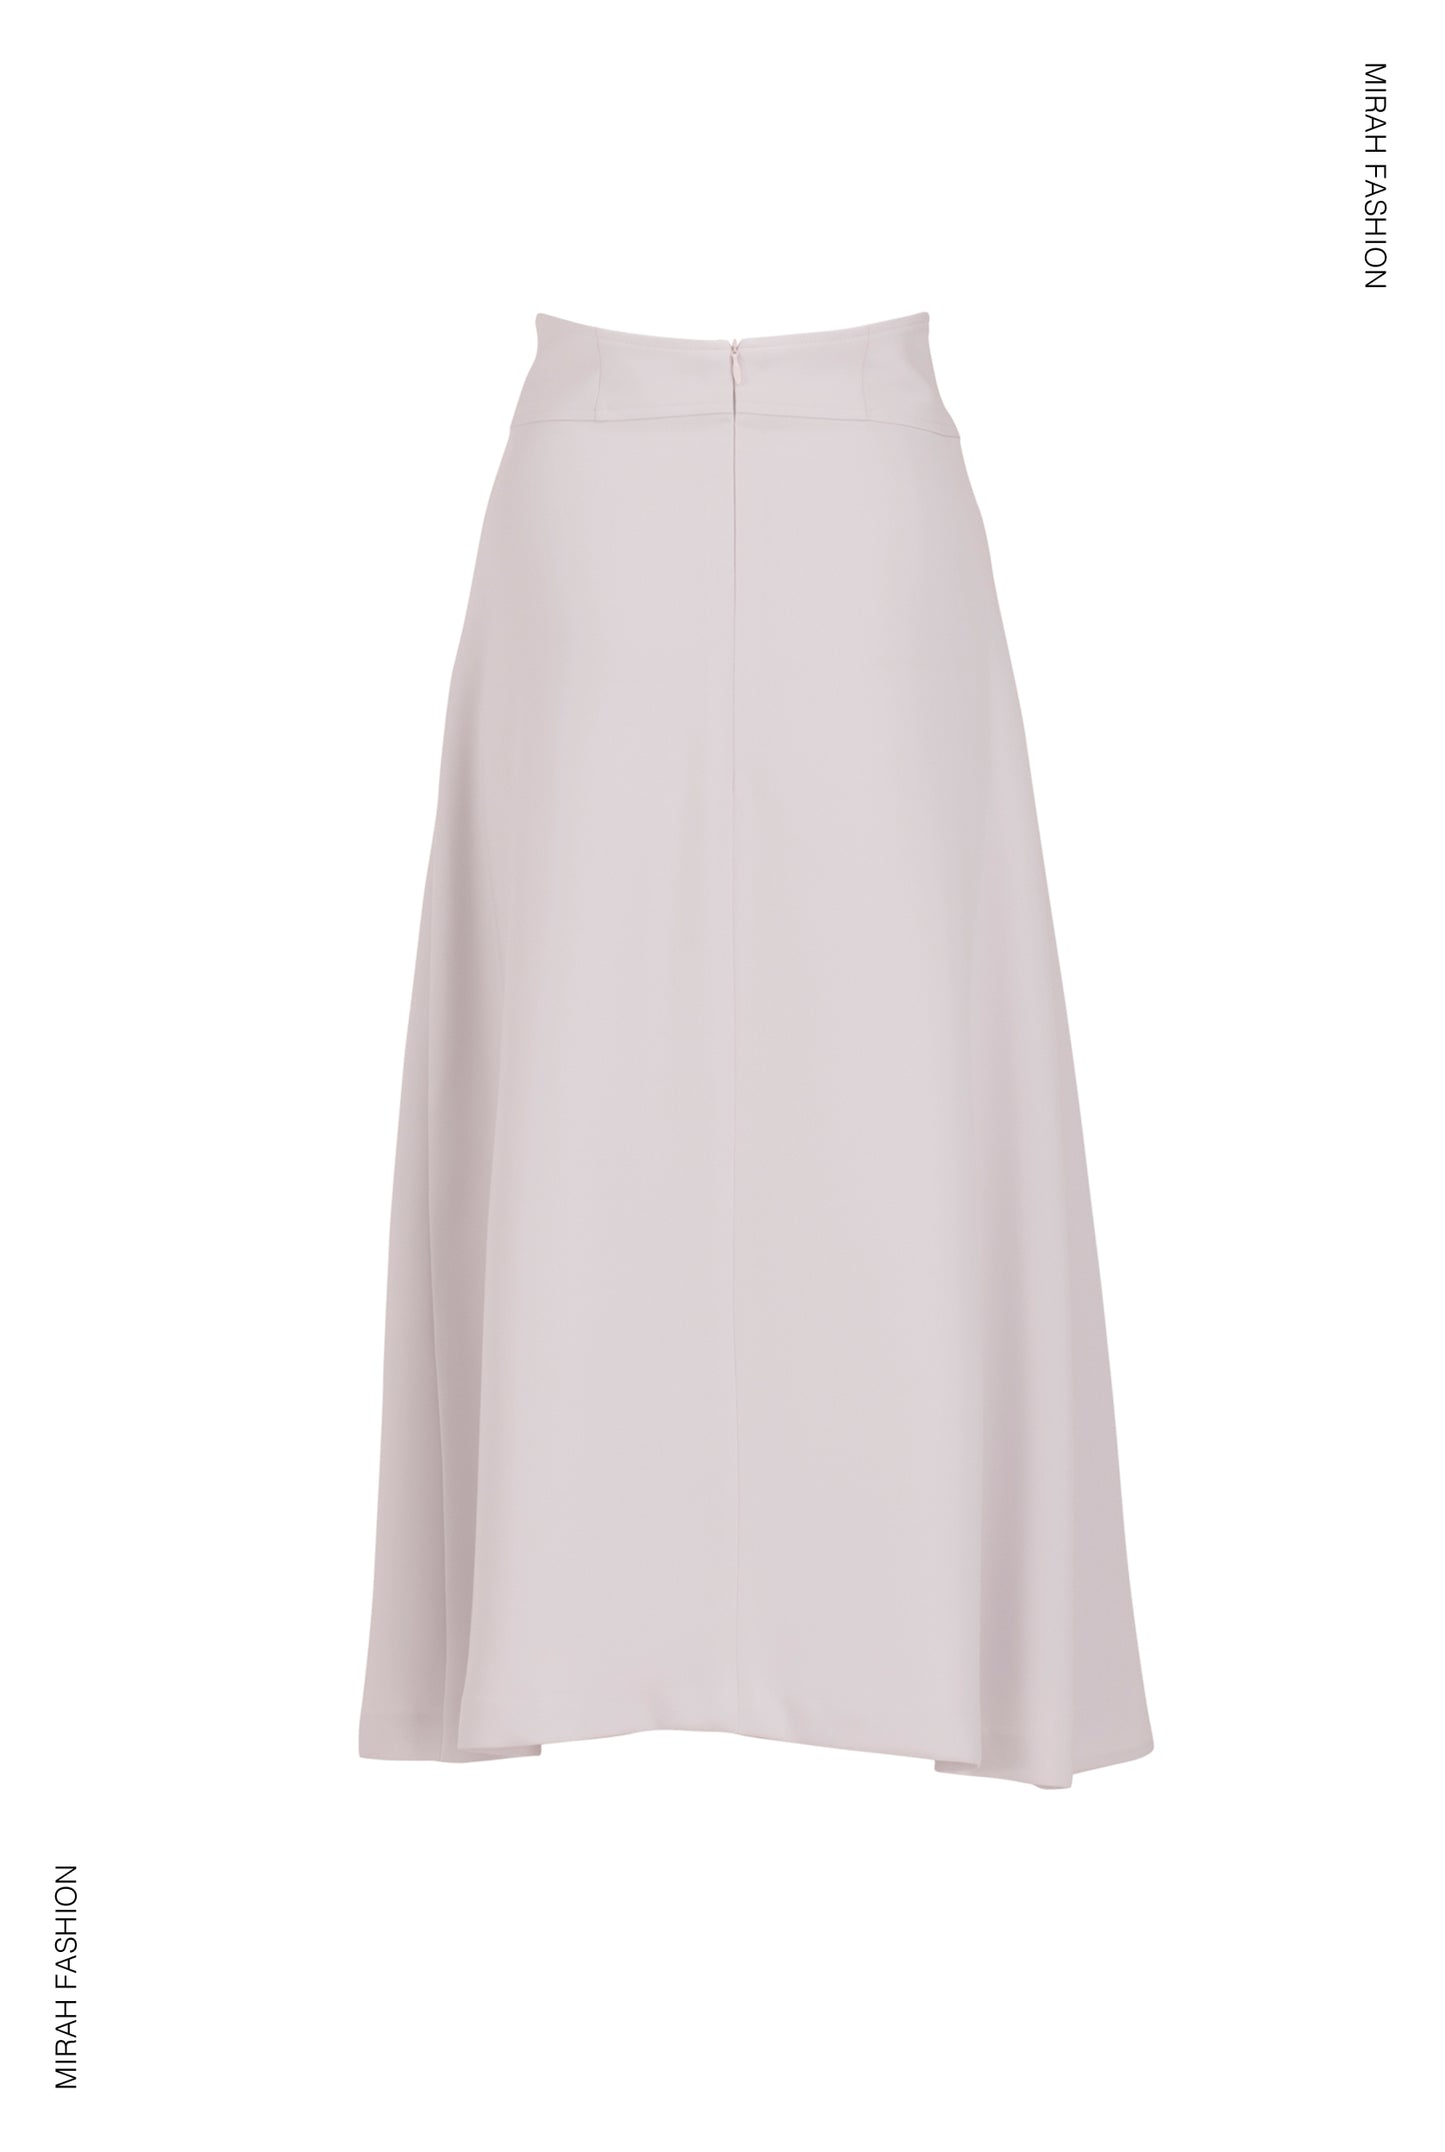 A-Line Skirt with Belt Strap